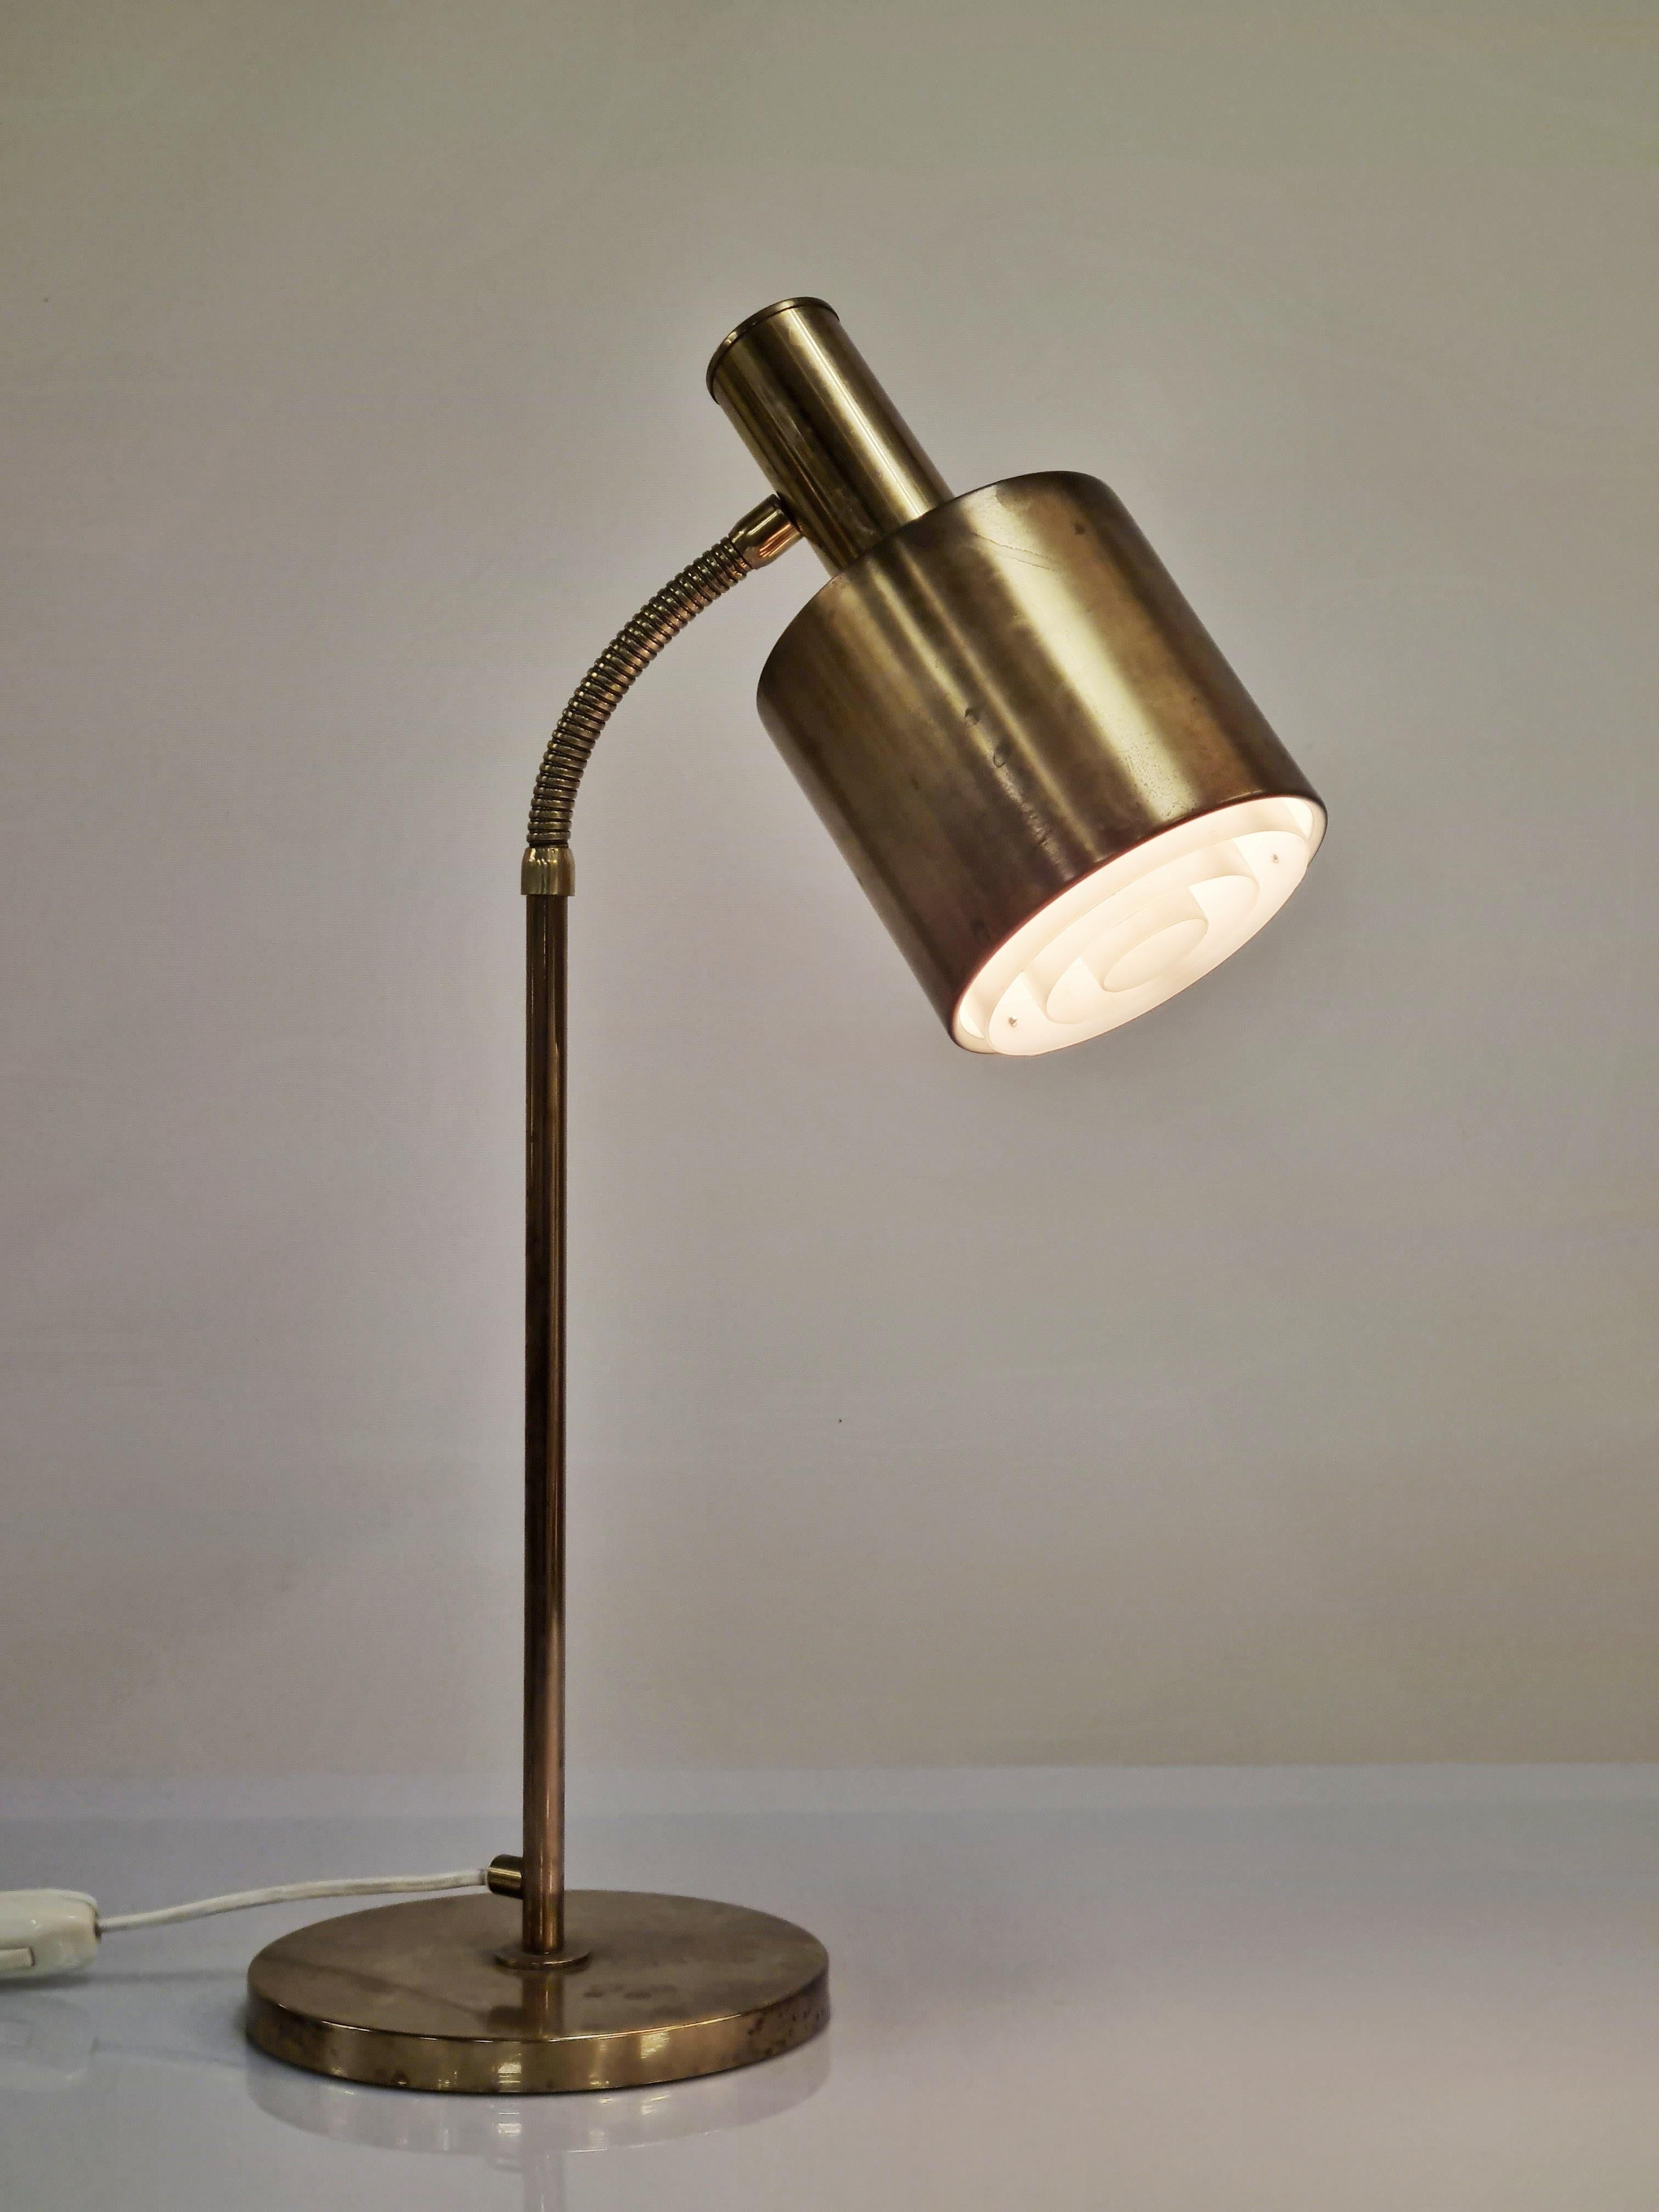 Beautiful vintage table lamp with Swedish markings (please see pictures). The lamp has an absolute gorgeous patina to the brass parts and is in a very good condition. Even though we cannot identify the maker or the designer, the lamp is of very high